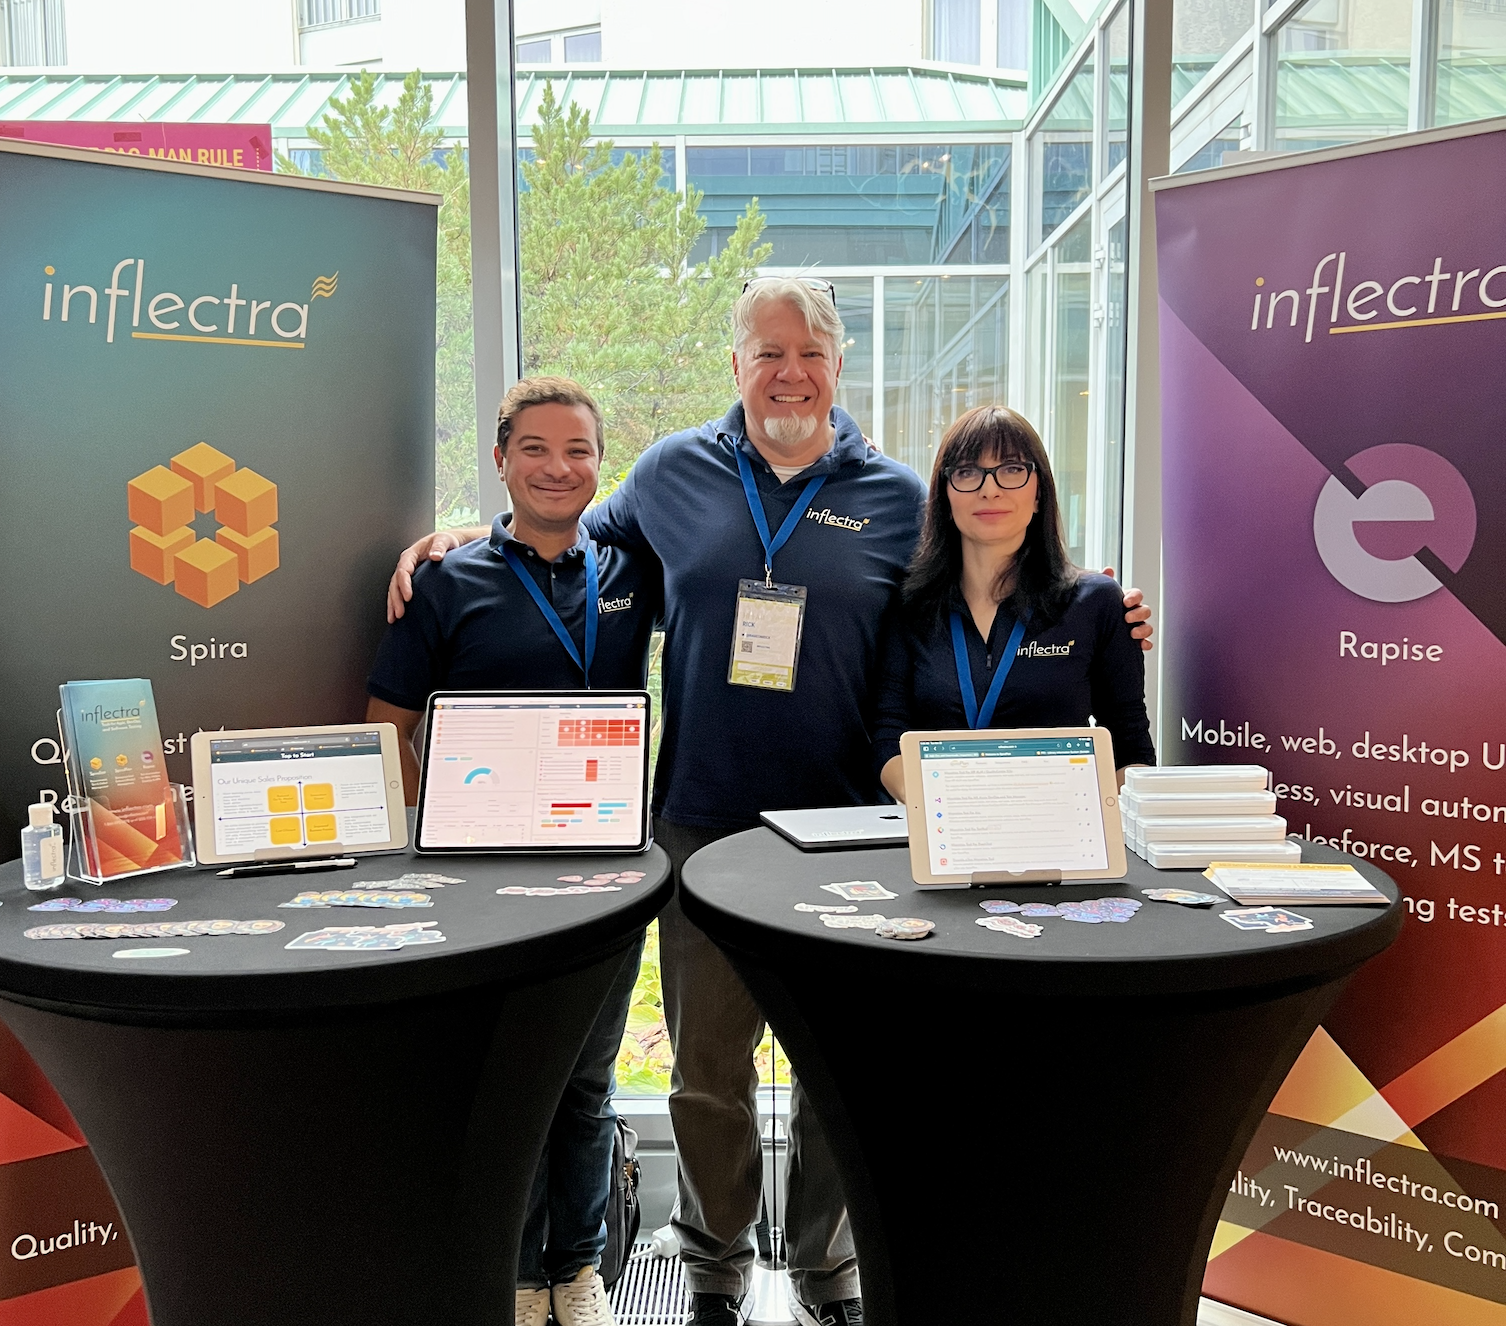 team-inflectra-at-atd-potsdam-2022-image